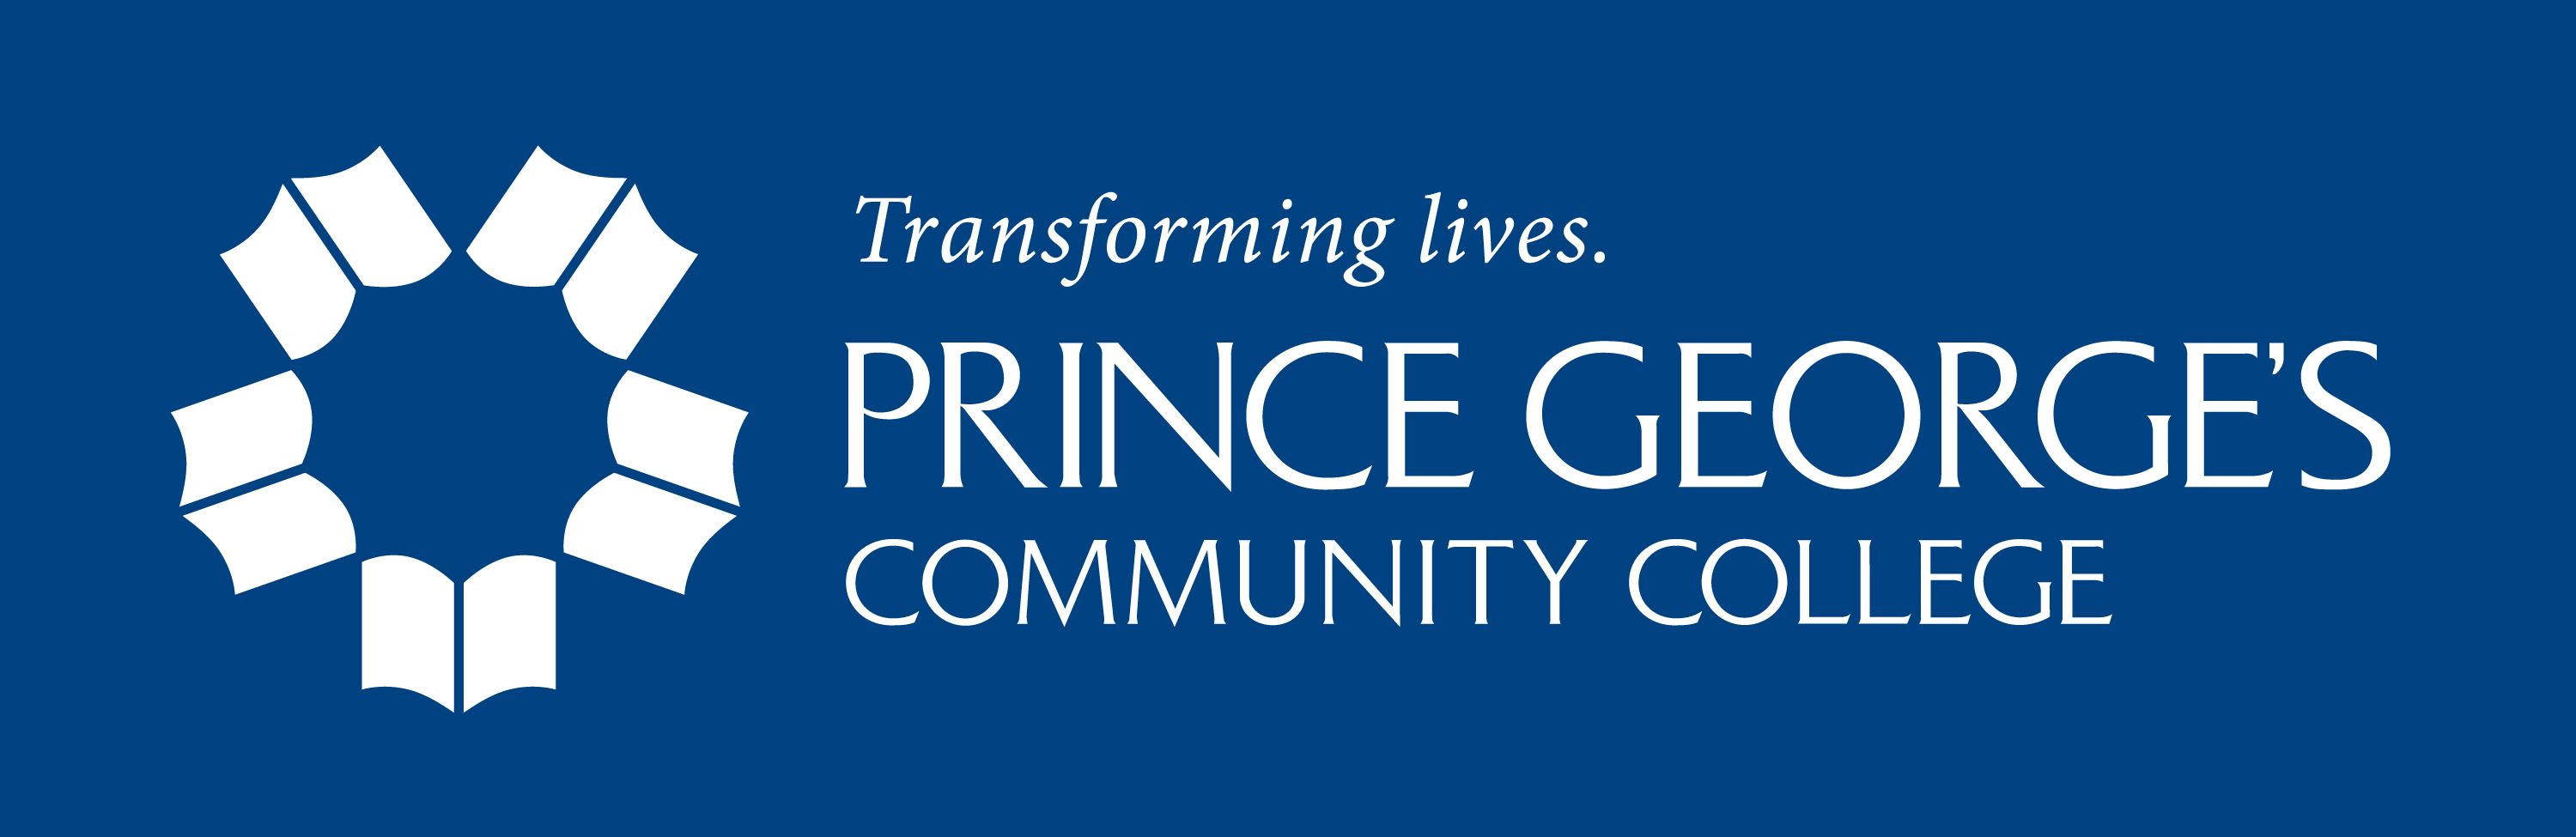 Transforming lives. Prince George's Community College